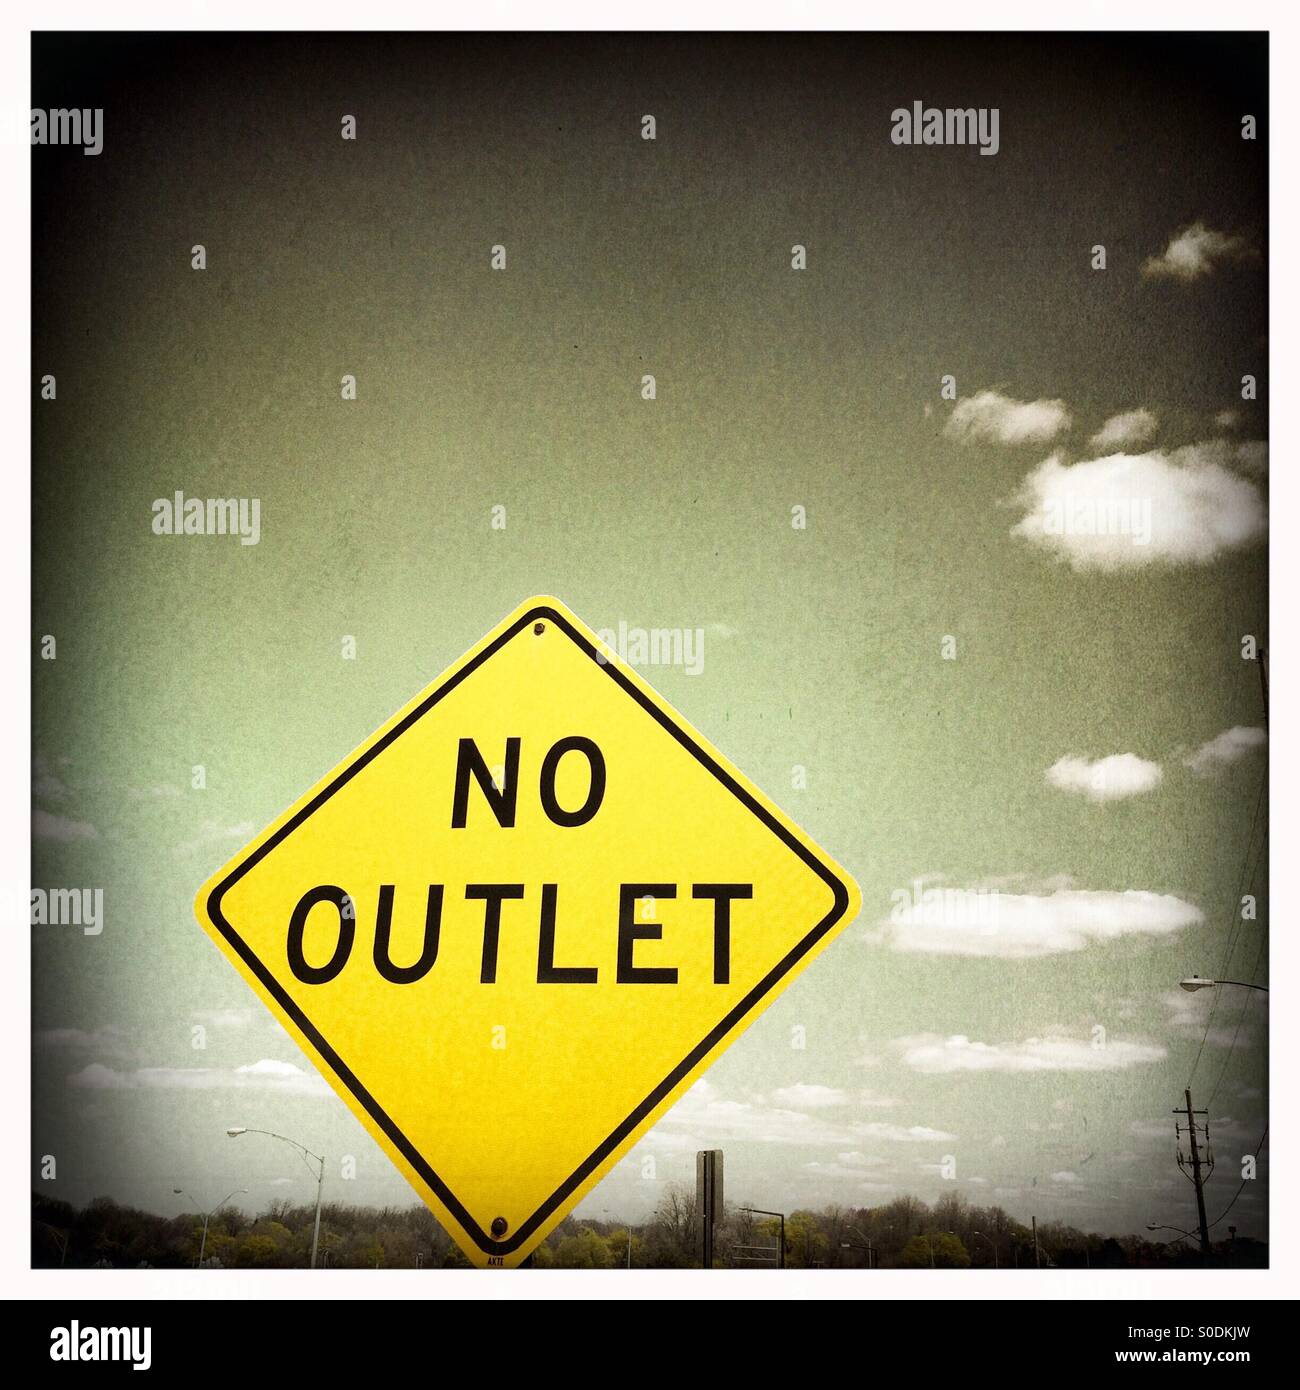 No Outlet sign against an ominous gray sky Stock Photo